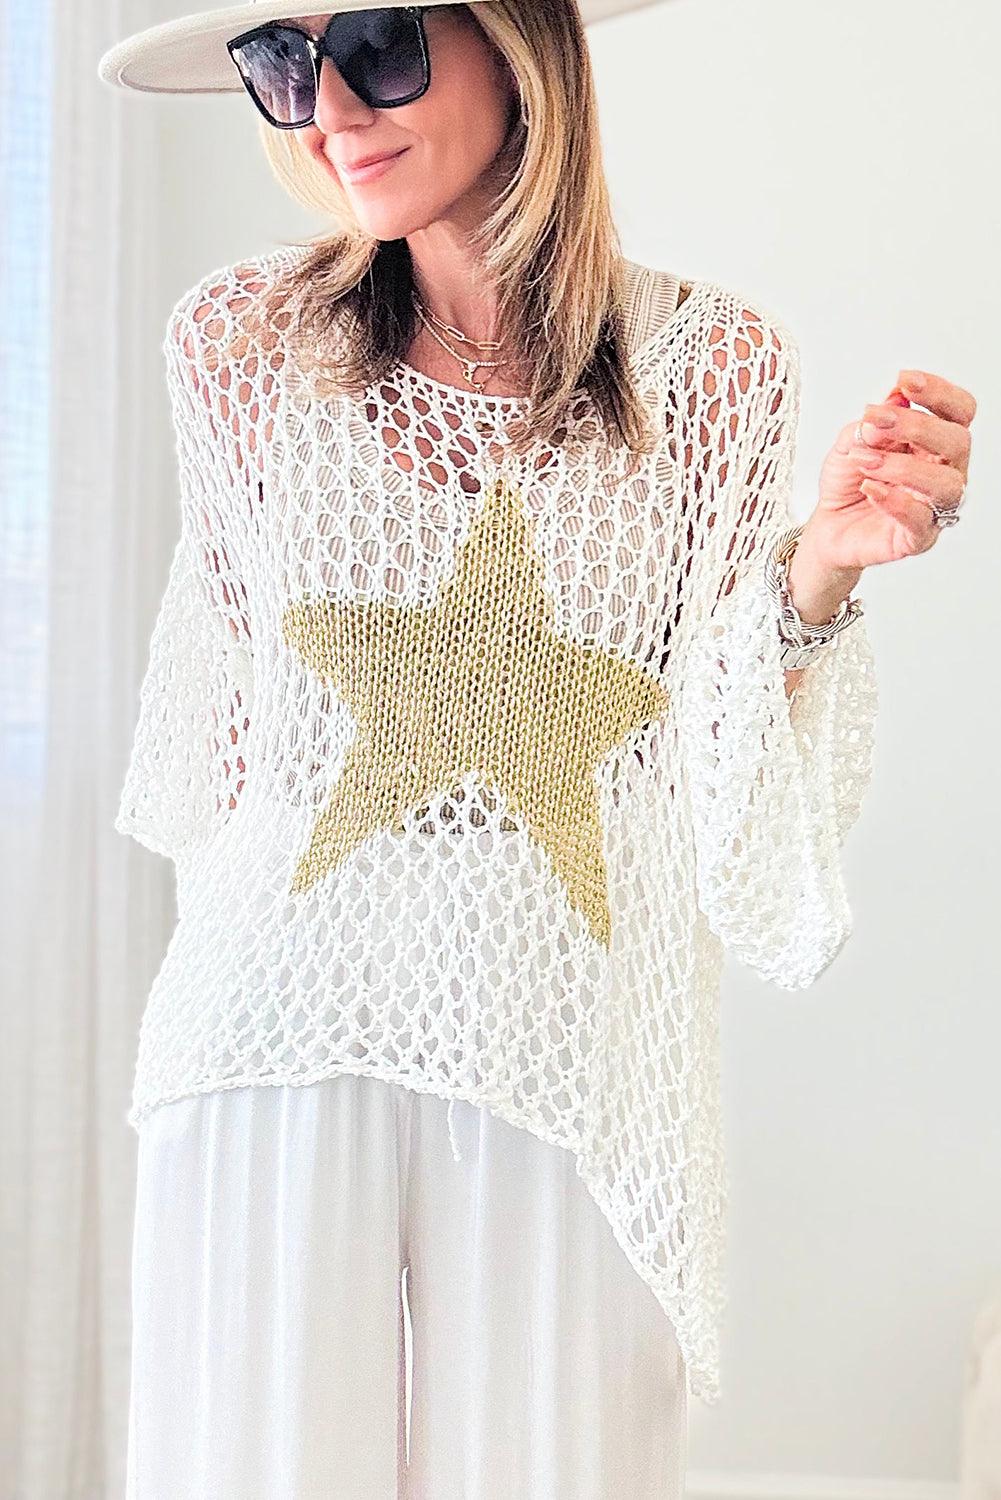 White Star Graphic Crochet Knitted Summer Sweater Top - L & M Kee, LLC